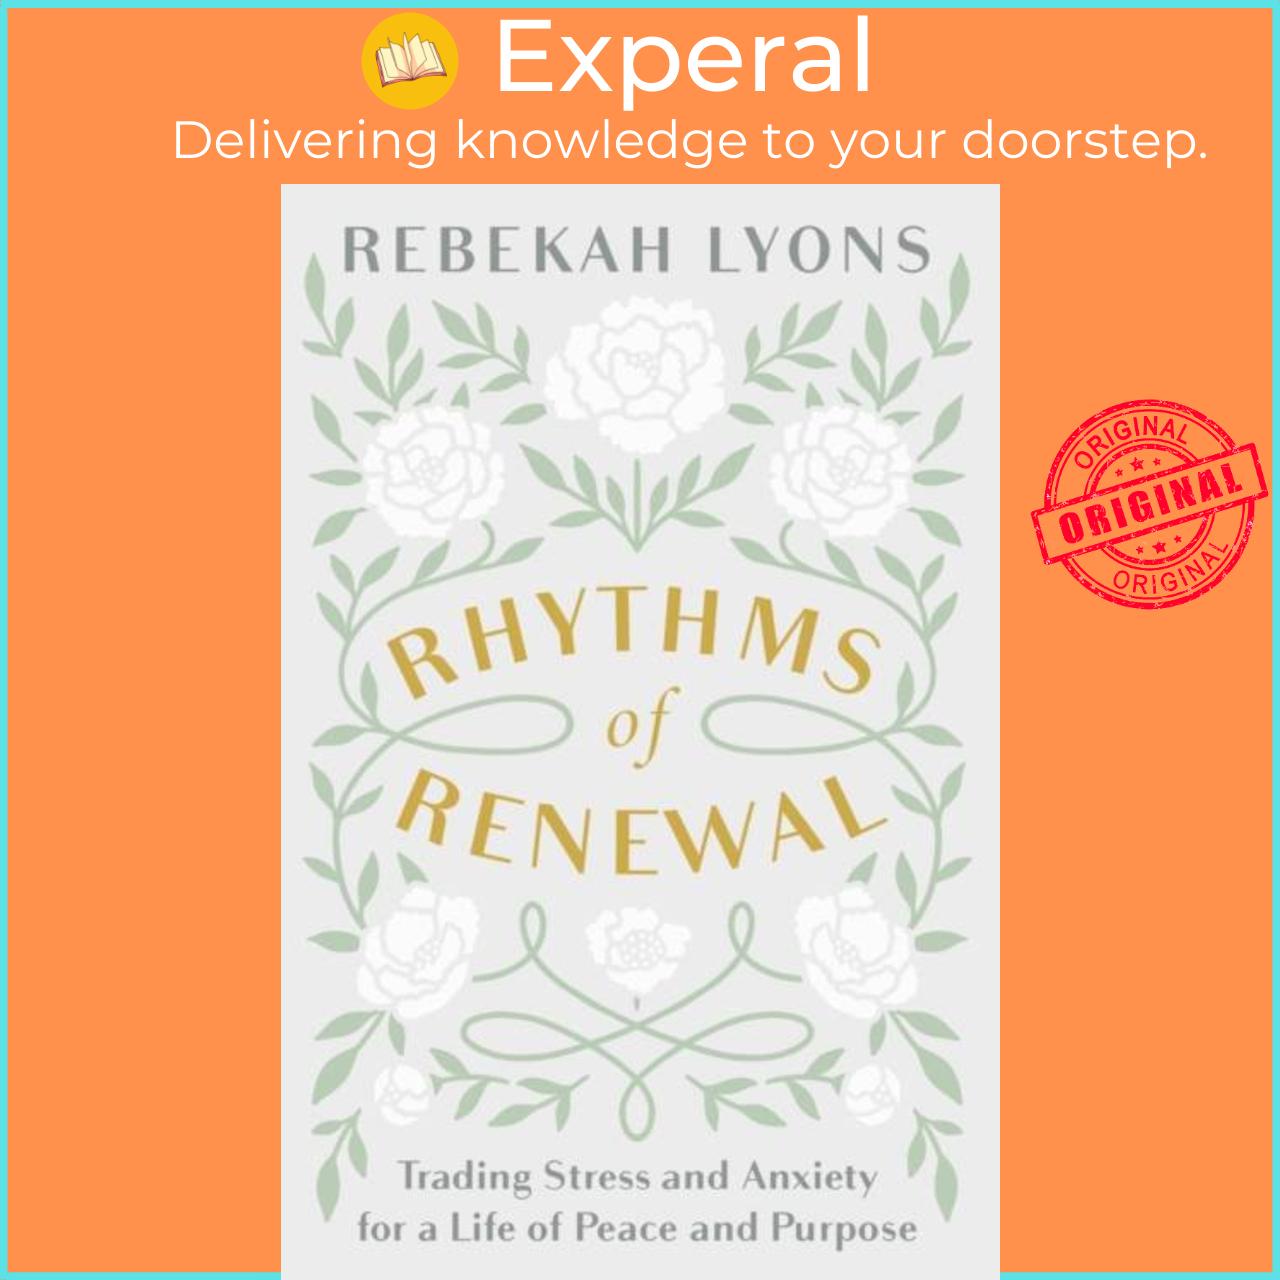 Sách - Rhythms of Renewal - Trading Stress and Anxiety for a Life of Peace and  by Rebekah Lyons (UK edition, paperback)